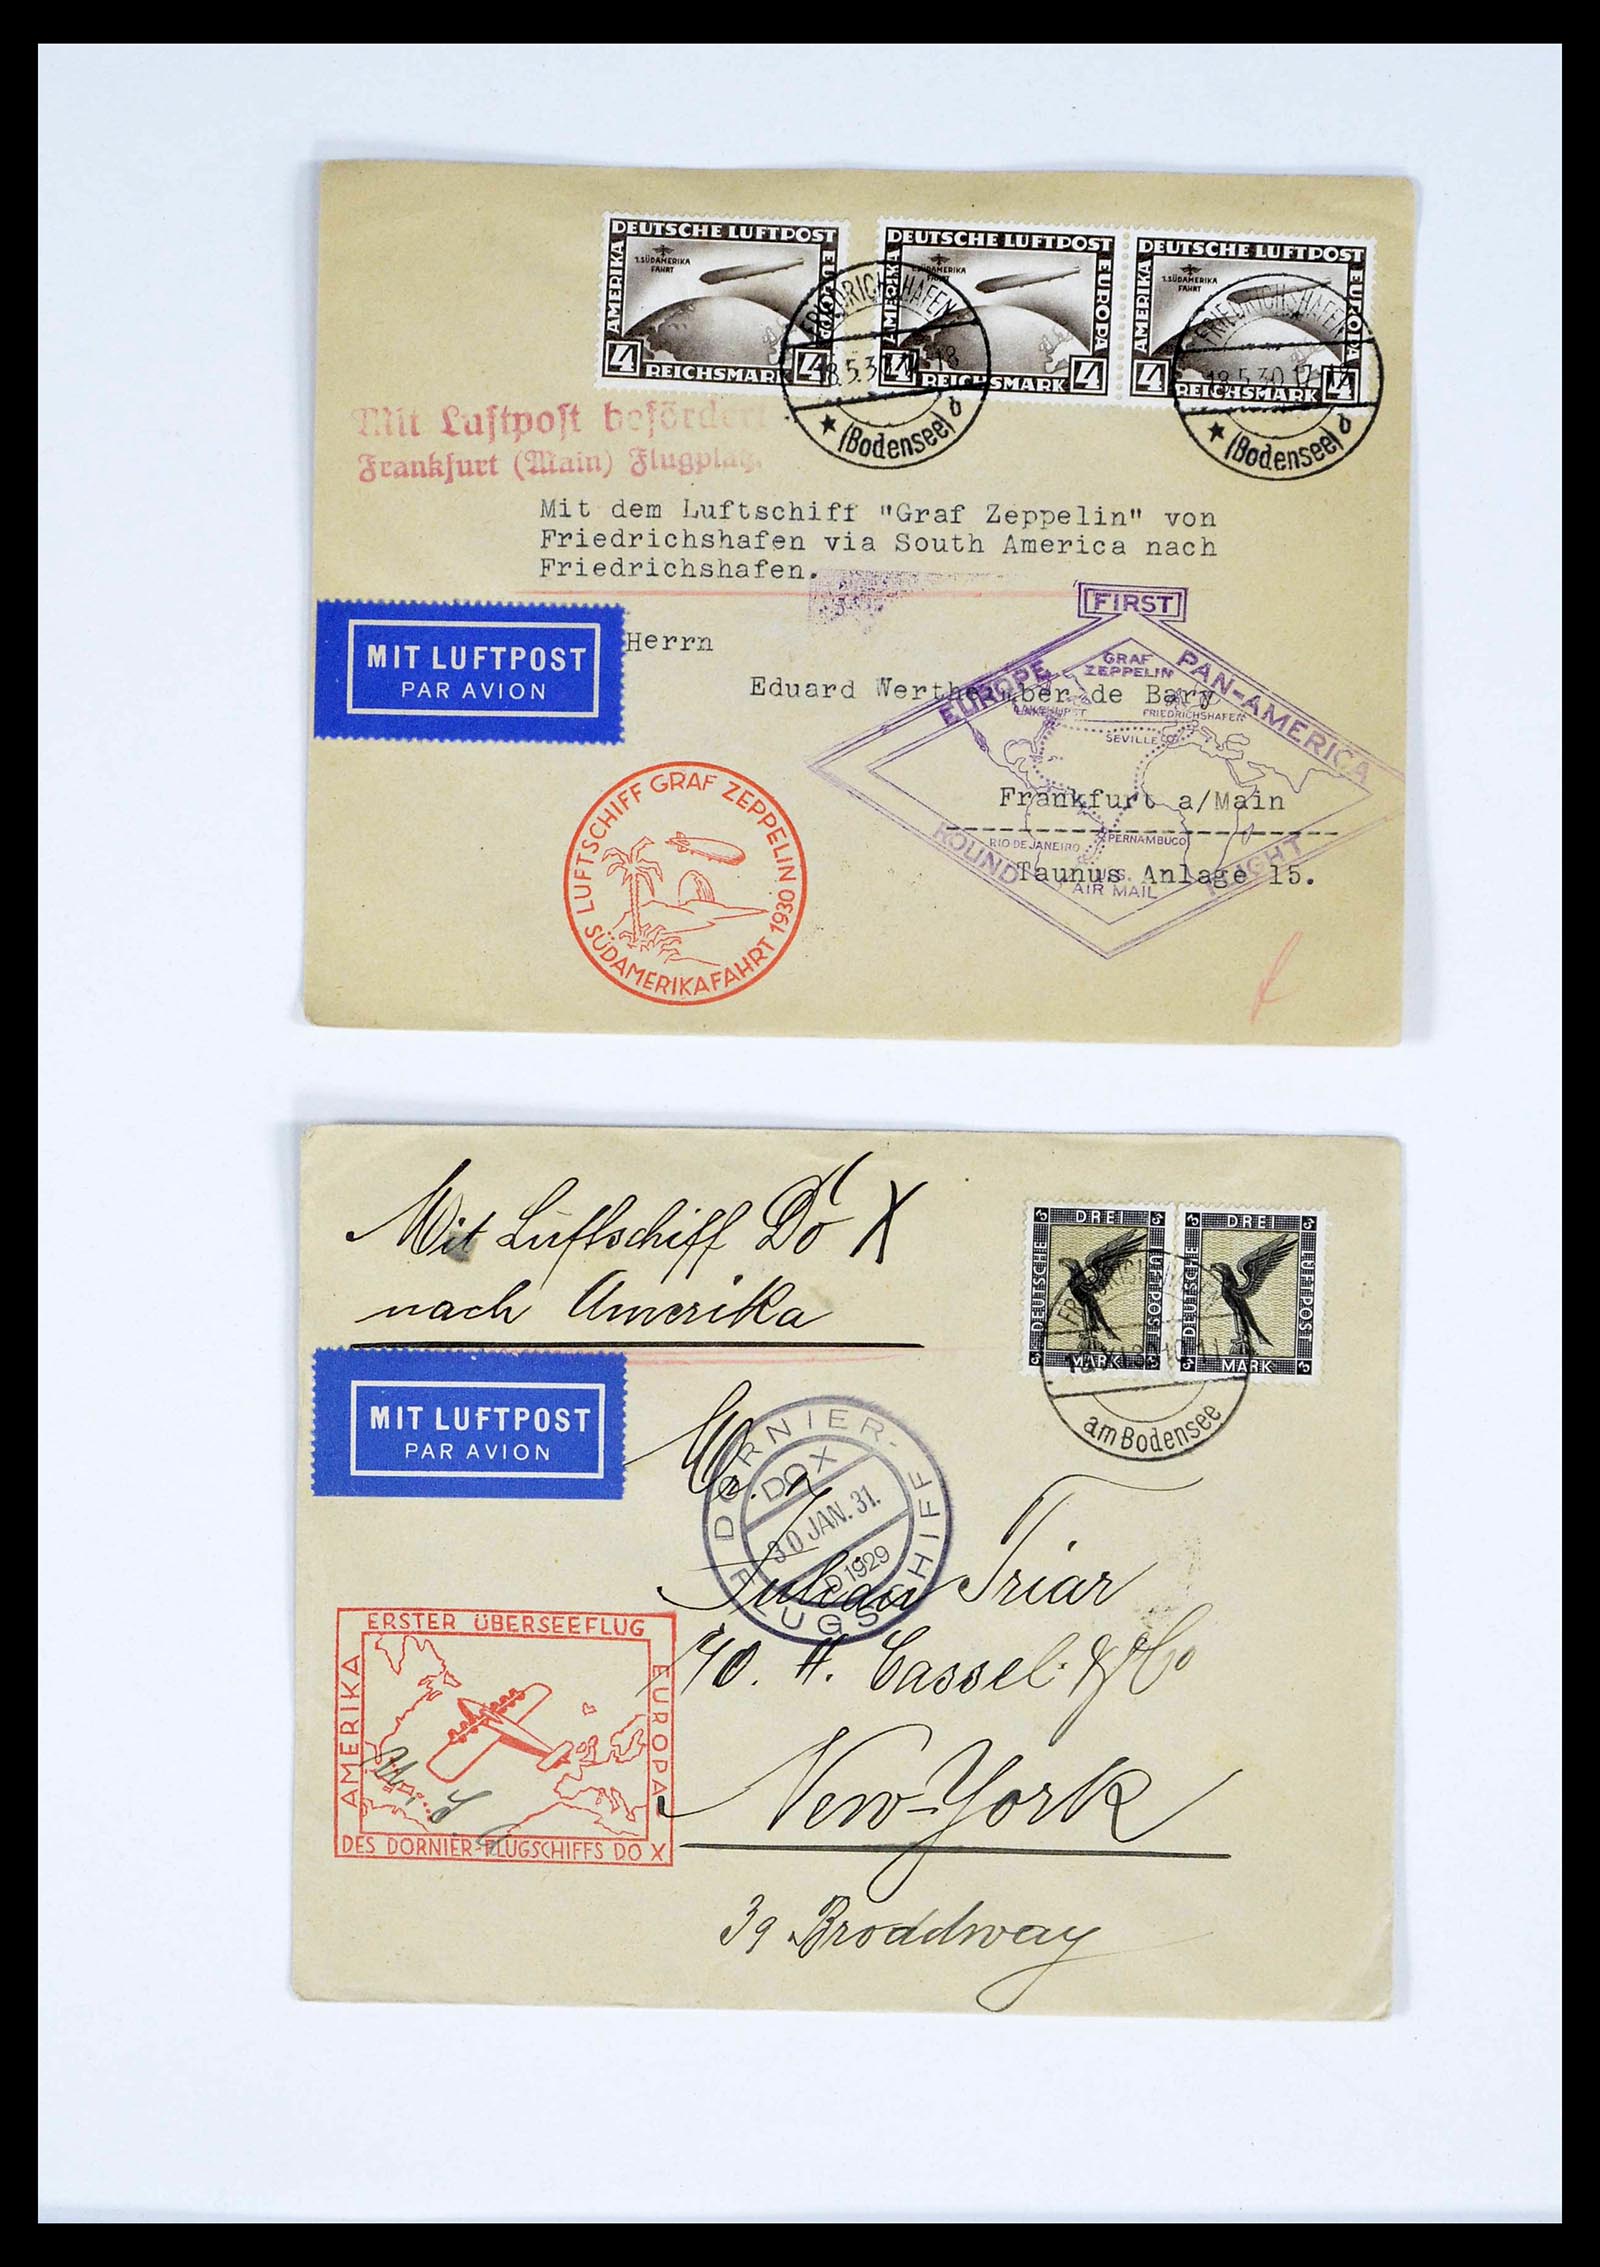 39032 0012 - Stamp collection 39032 Zeppelin covers 1928-1933.